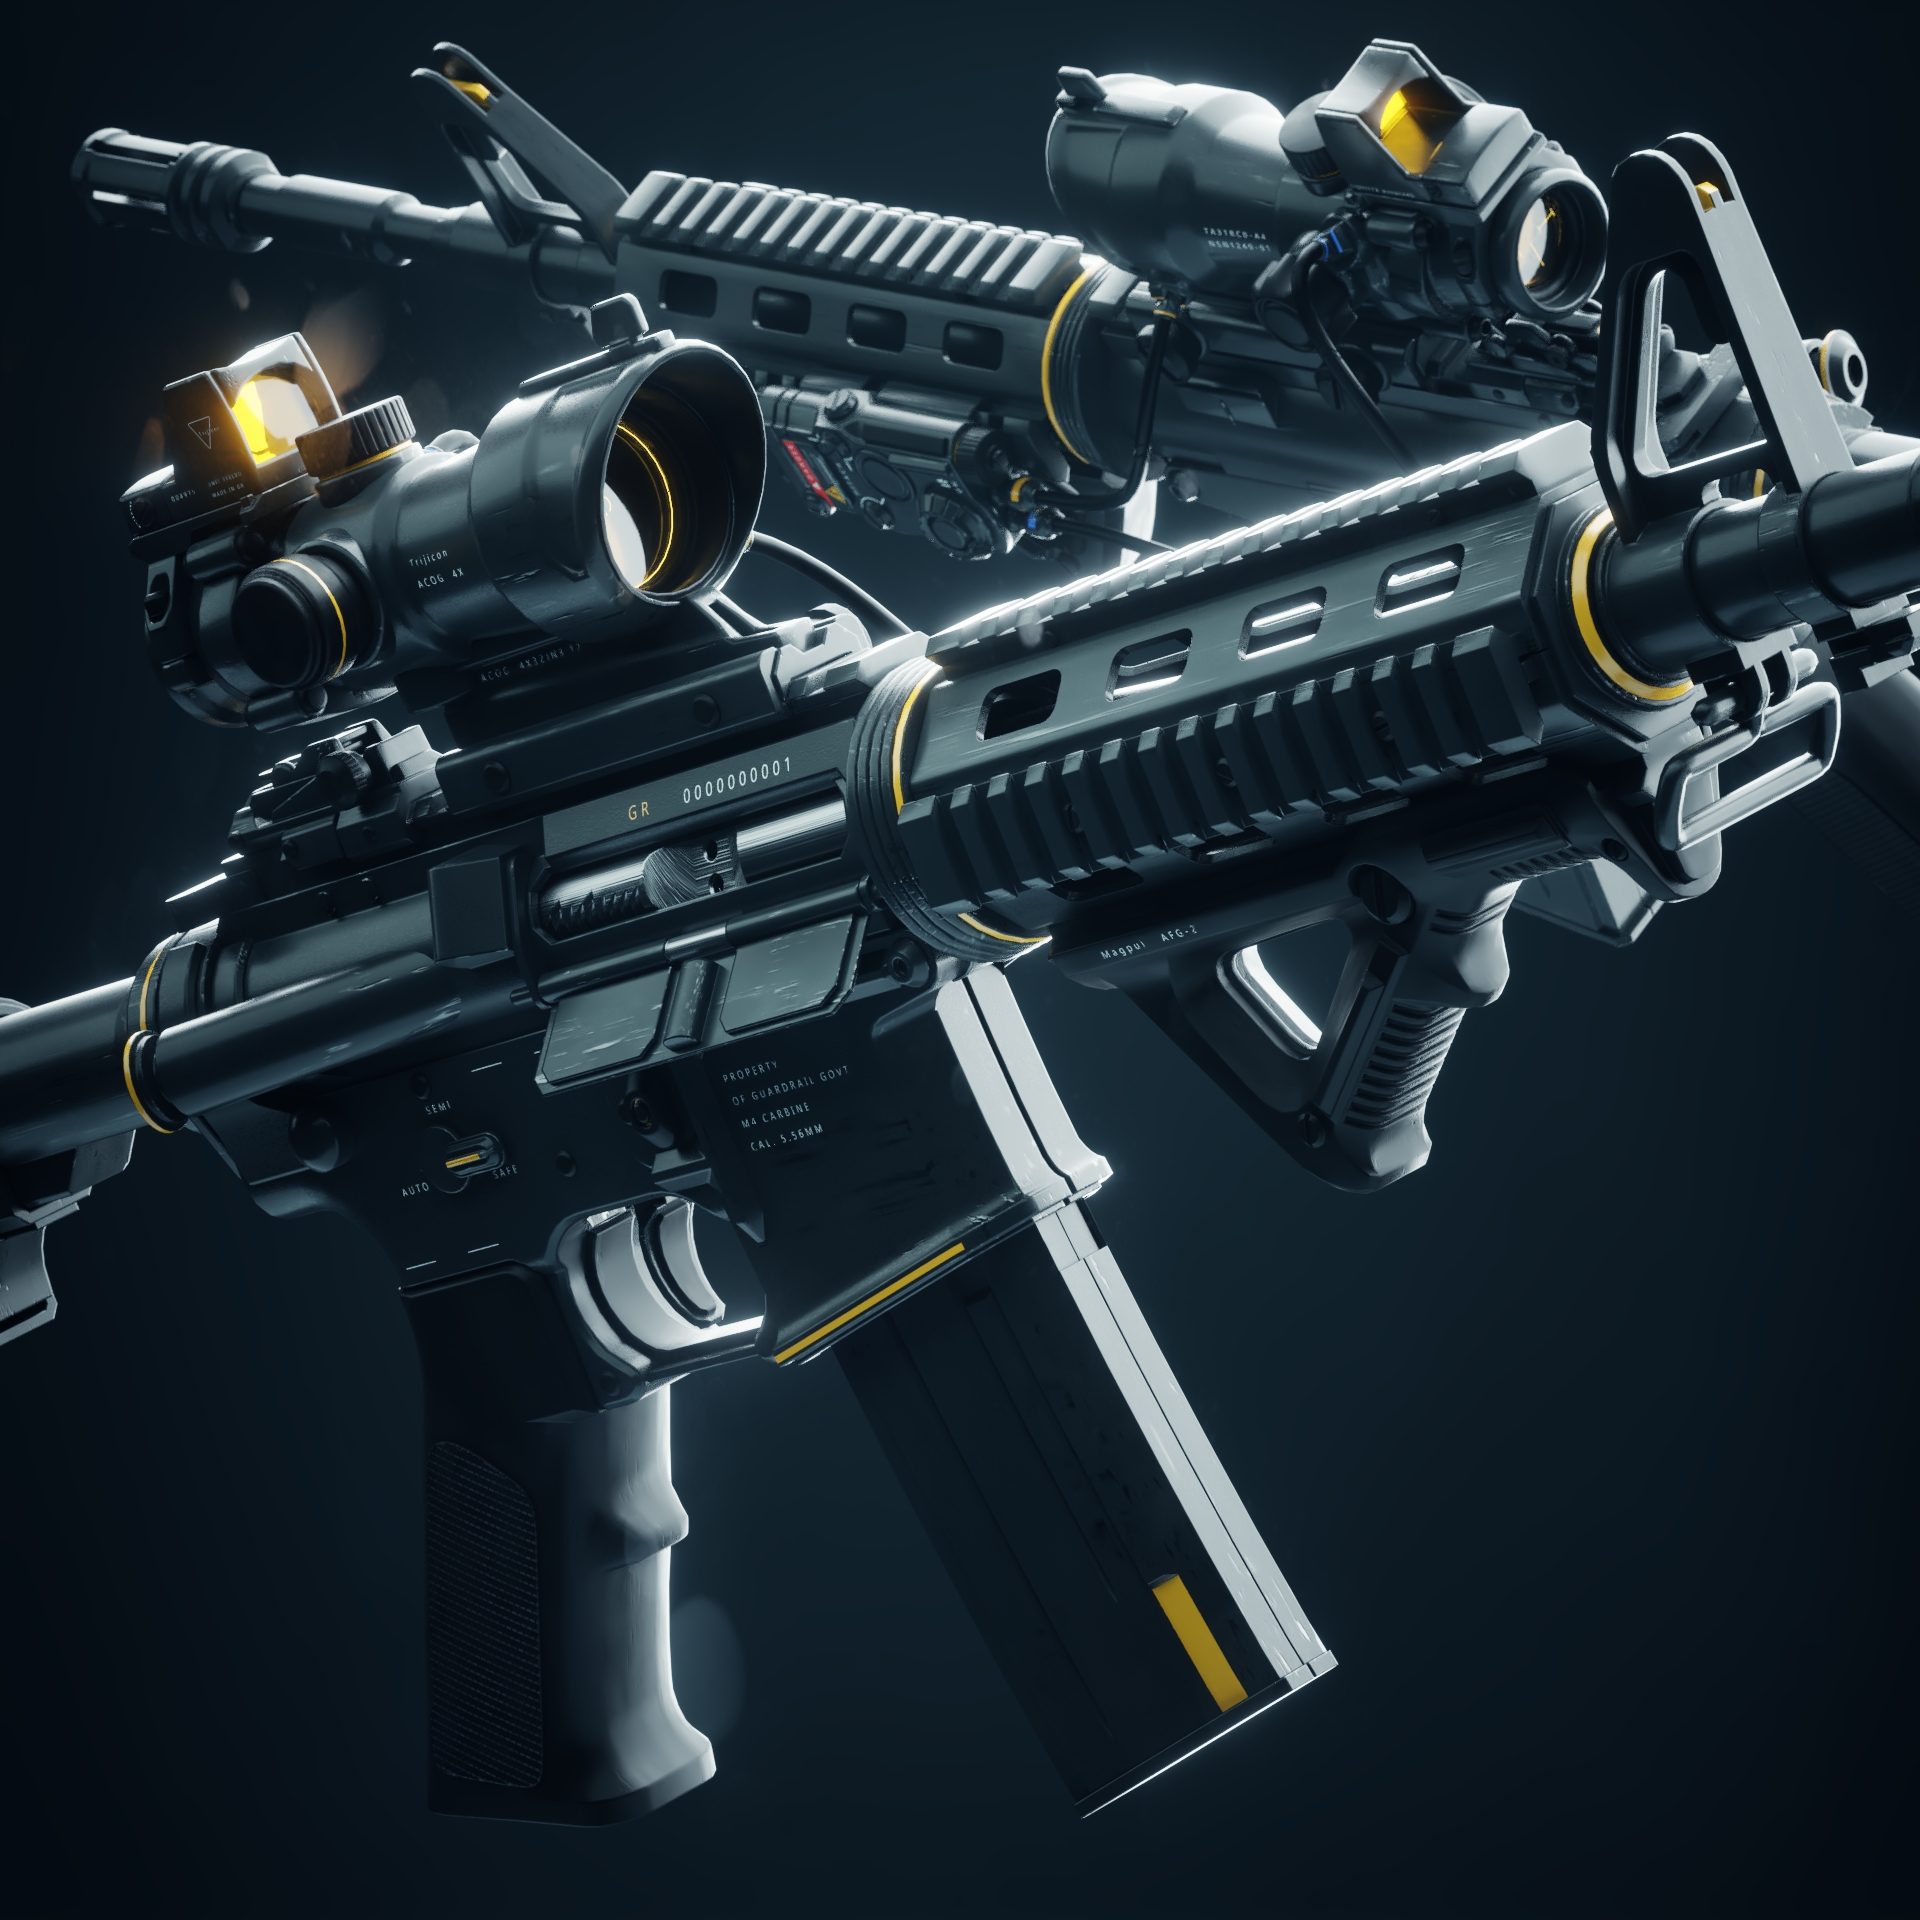 Cyber security m4a4 bs фото 28